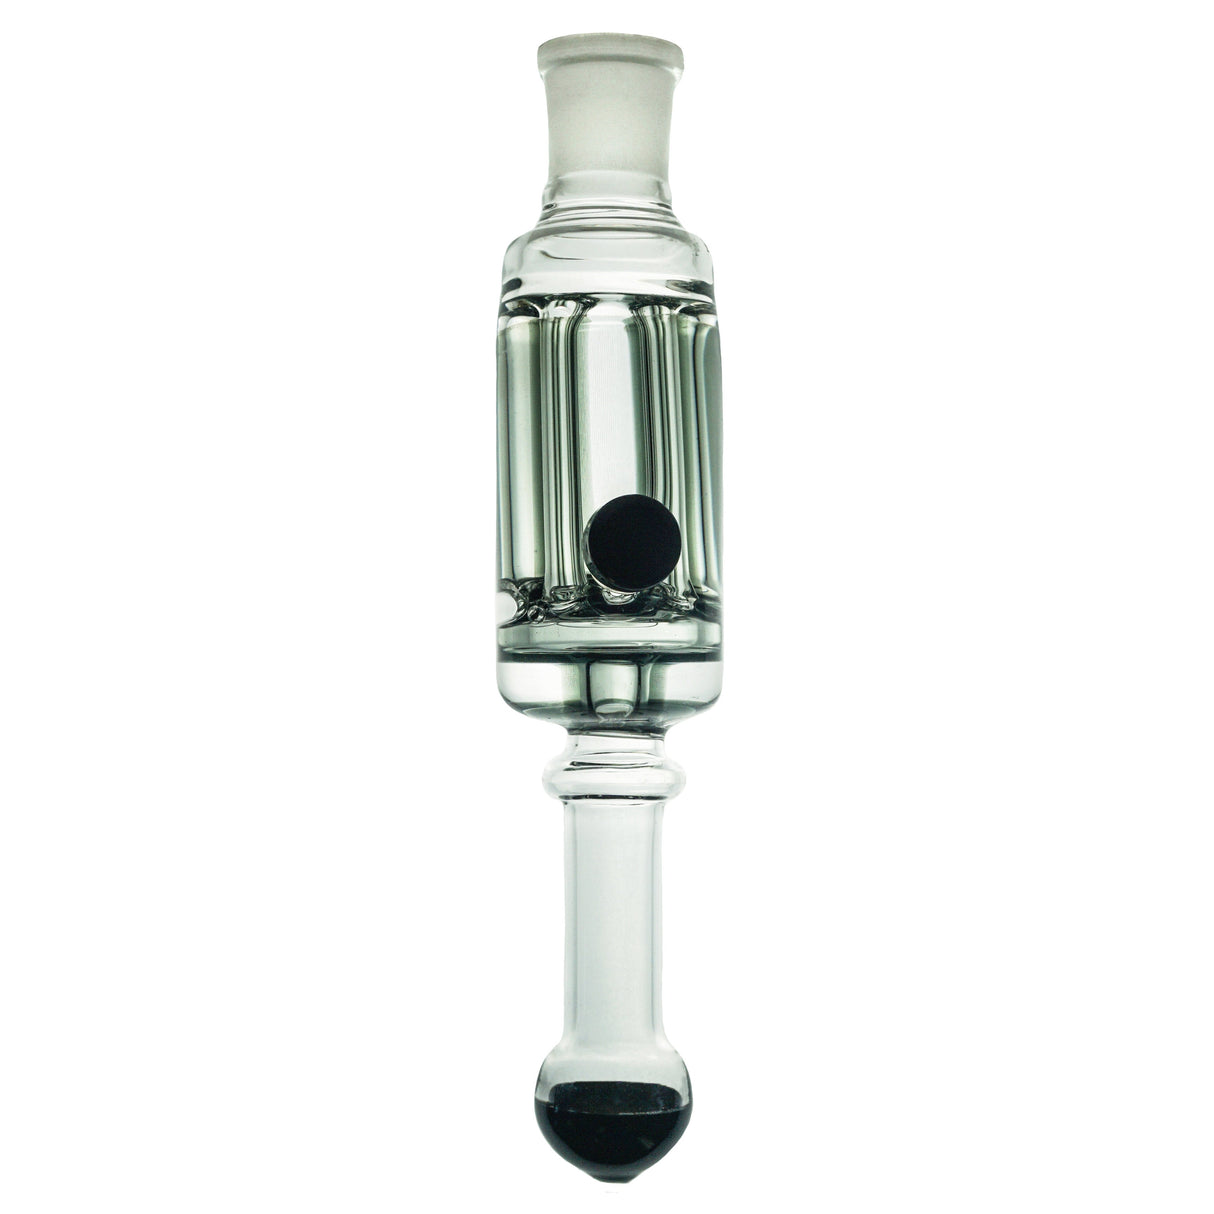 Freeze Pipe Bubbler Pro with glycerin chamber and percolator for smooth hits, front view